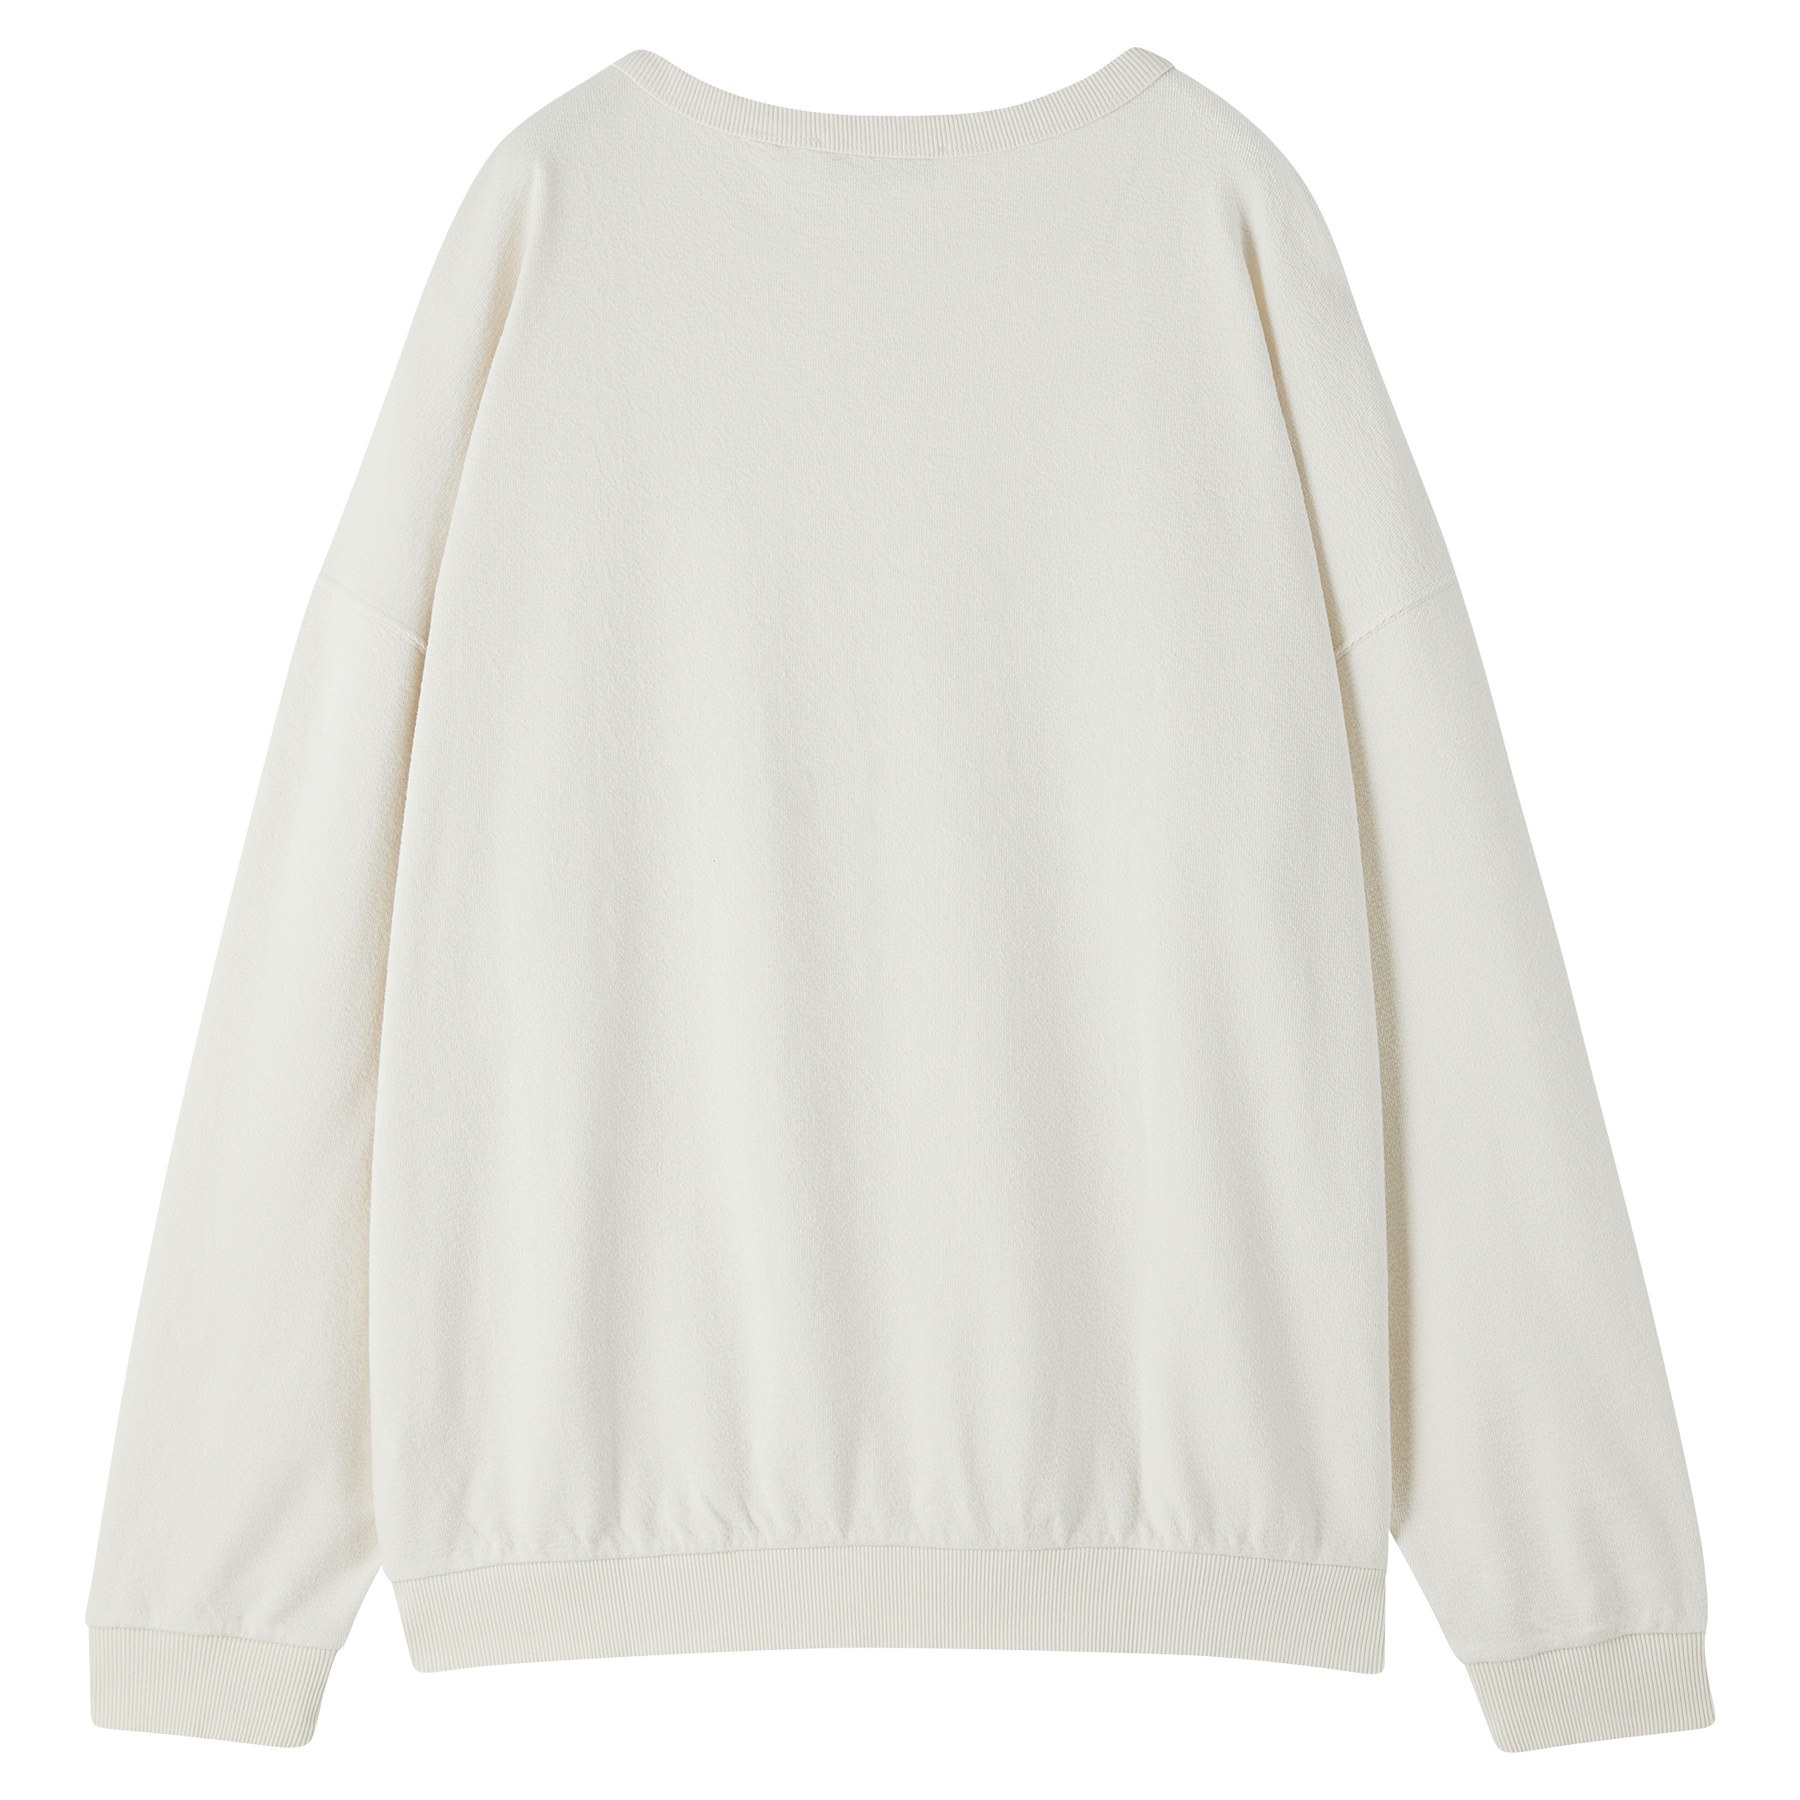 APPLIED ART FORMS Structure Sweater in Ecru S